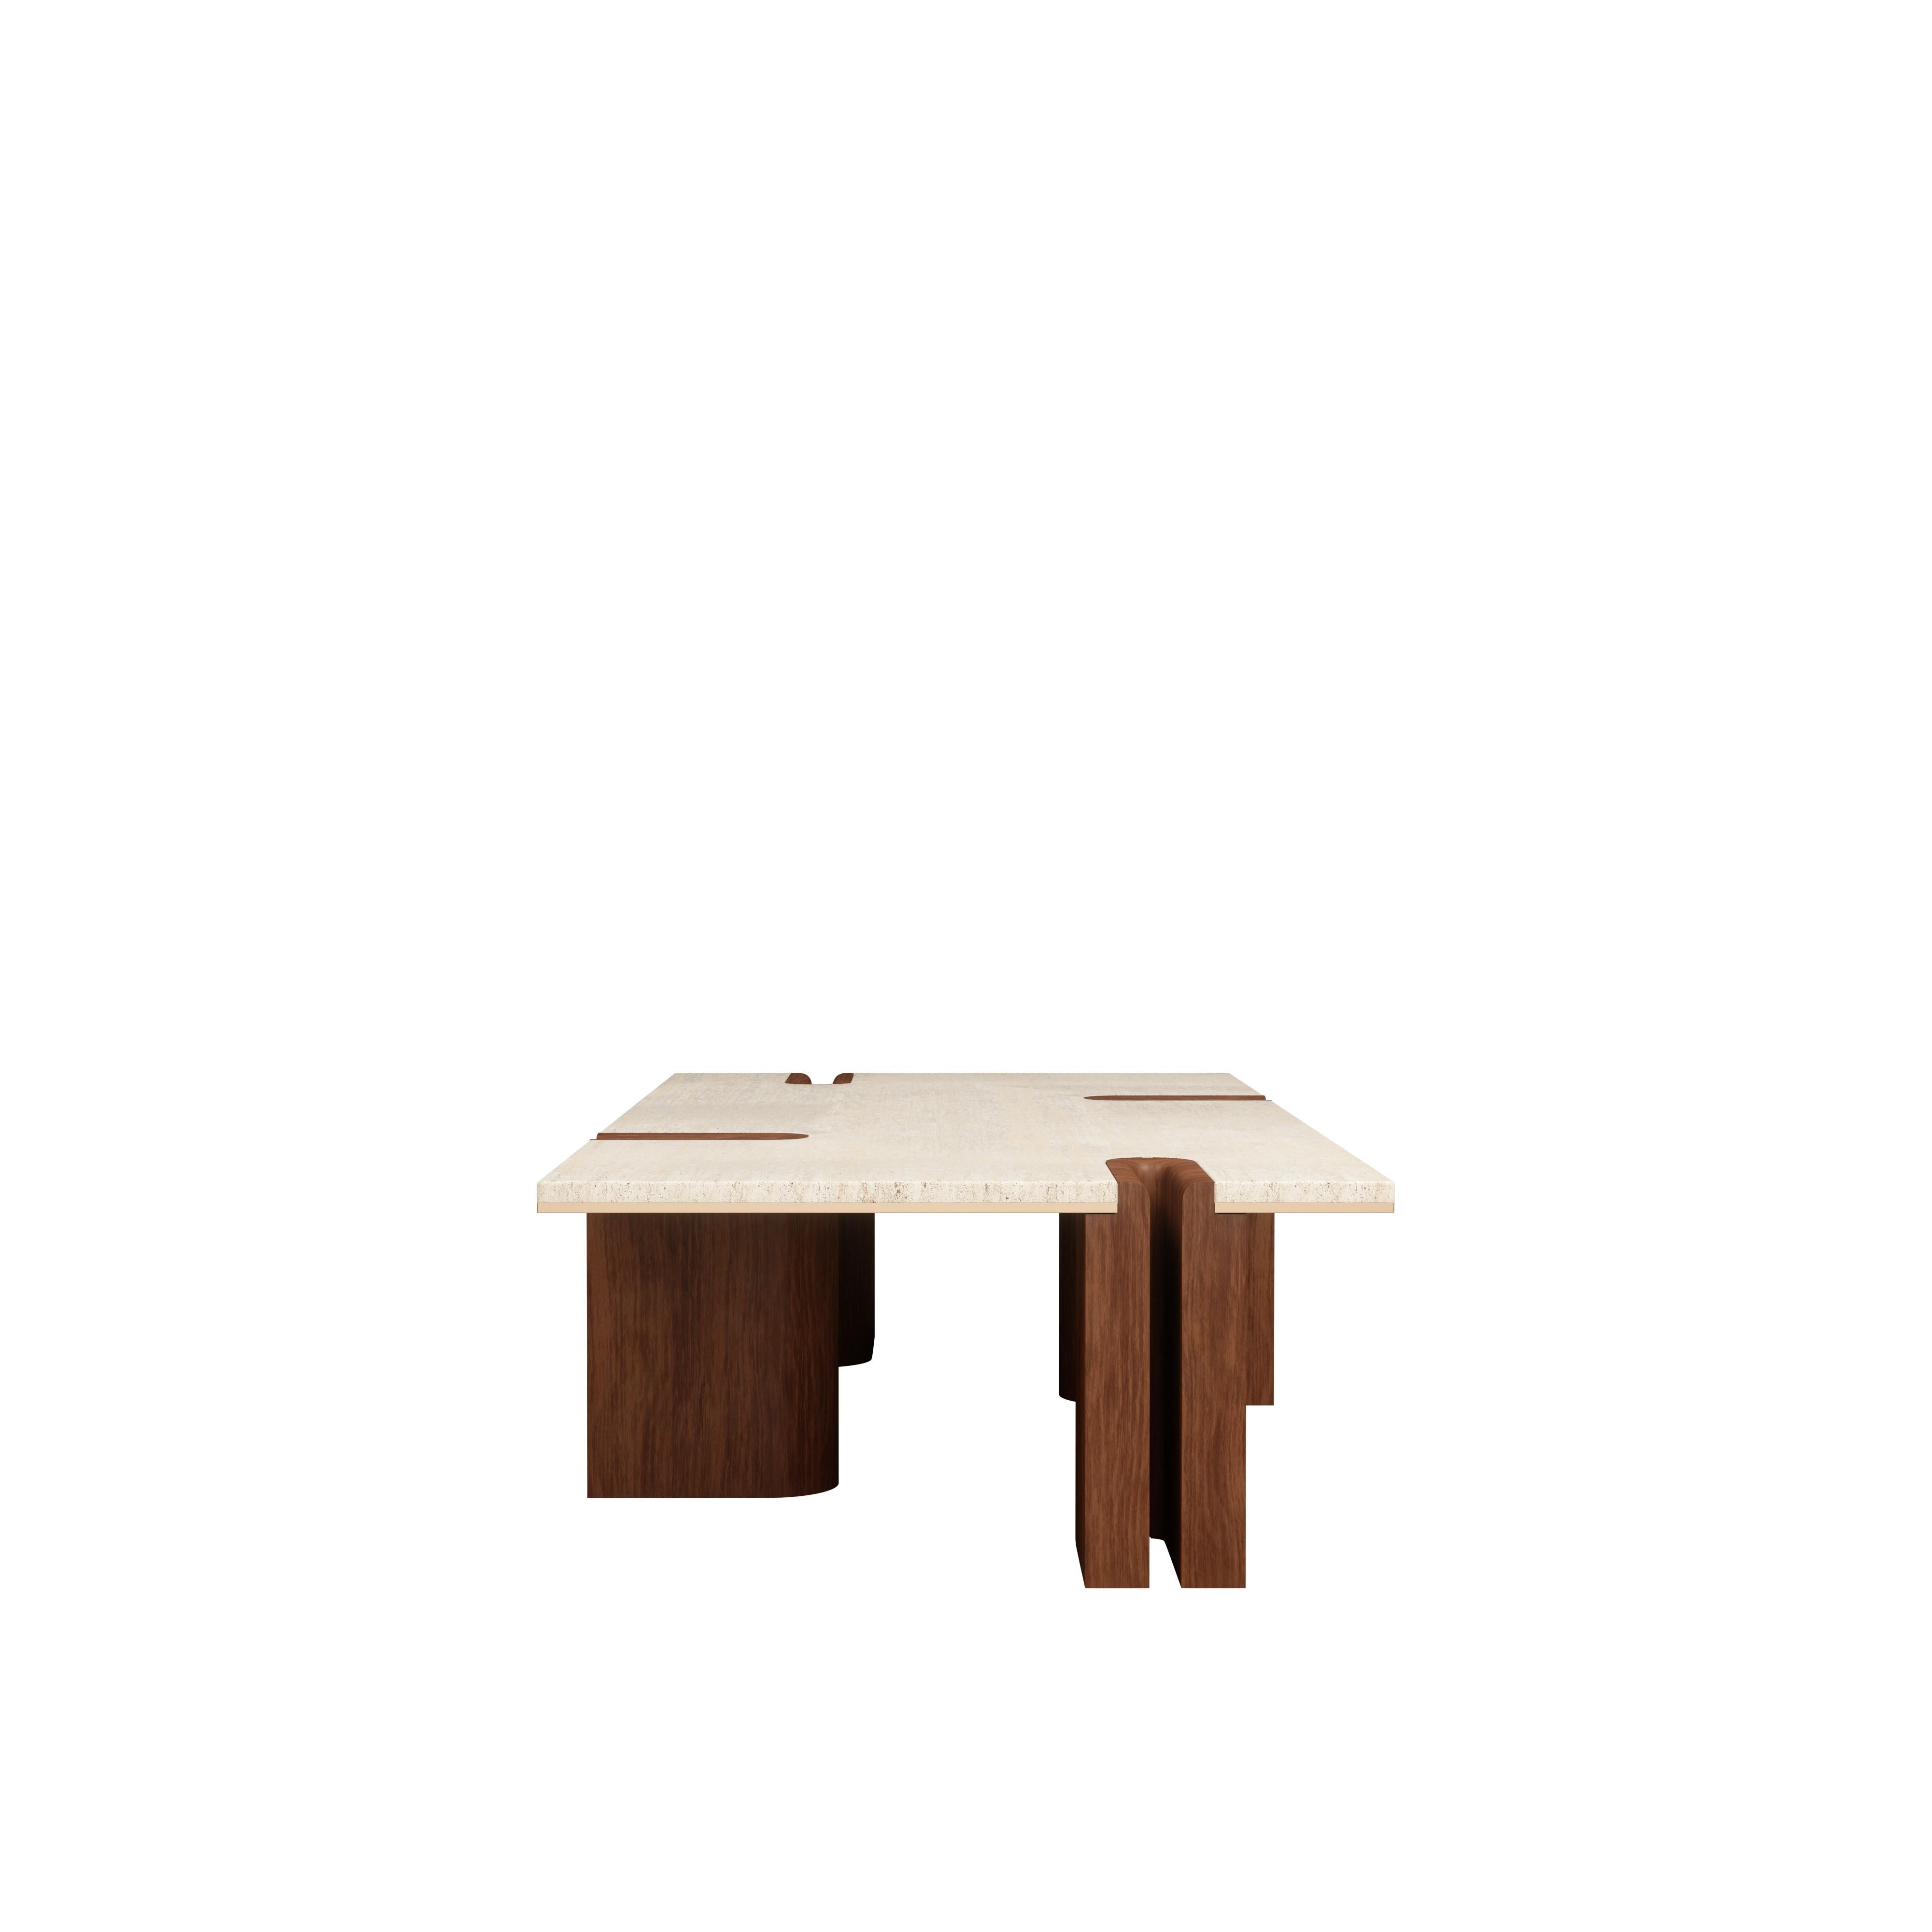 Contemporary 21st Grenville Center Table Tavetine Walnut Wood For Sale